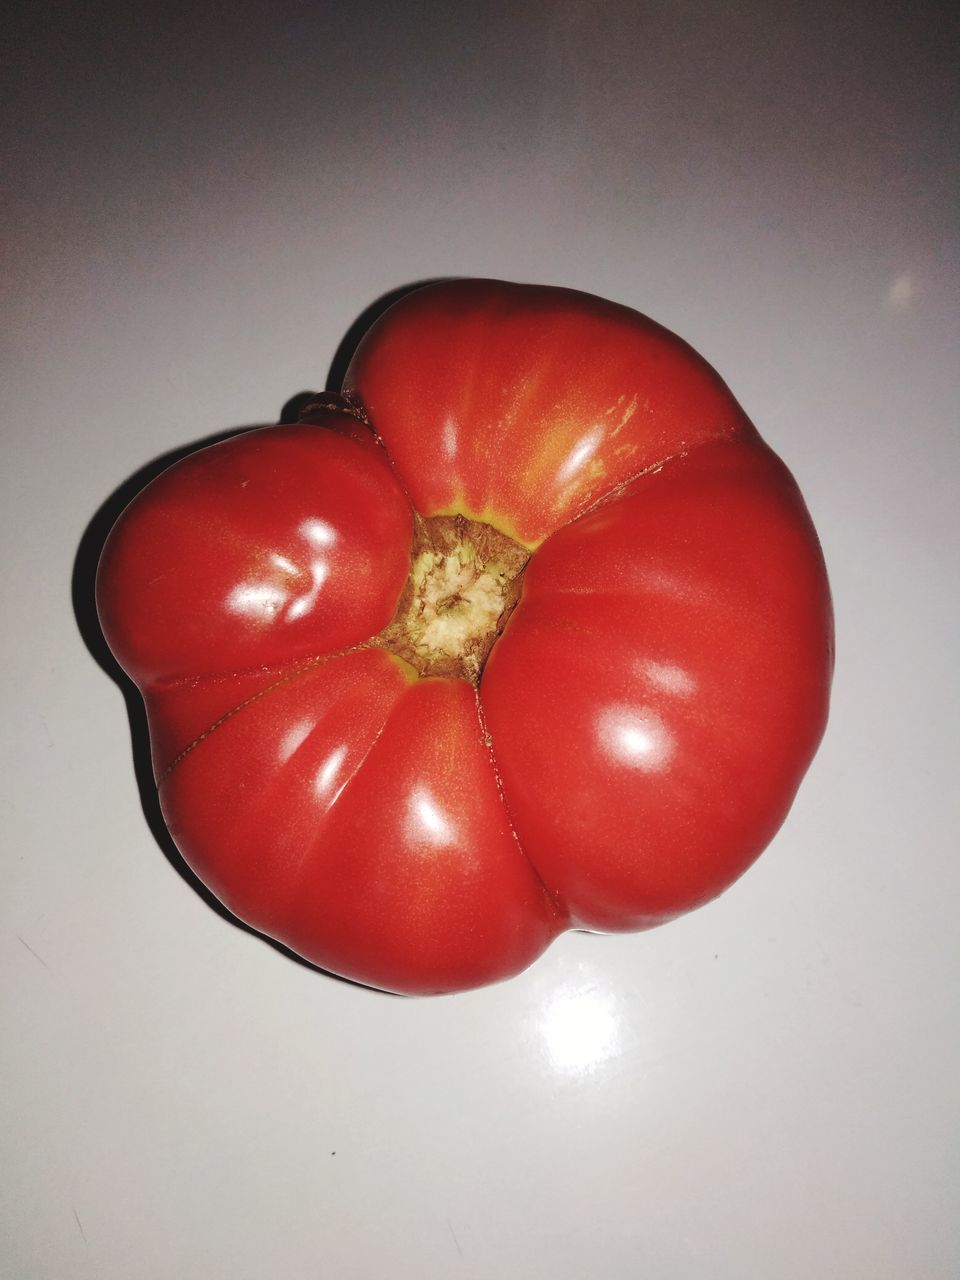 HIGH ANGLE VIEW OF RED TOMATOES